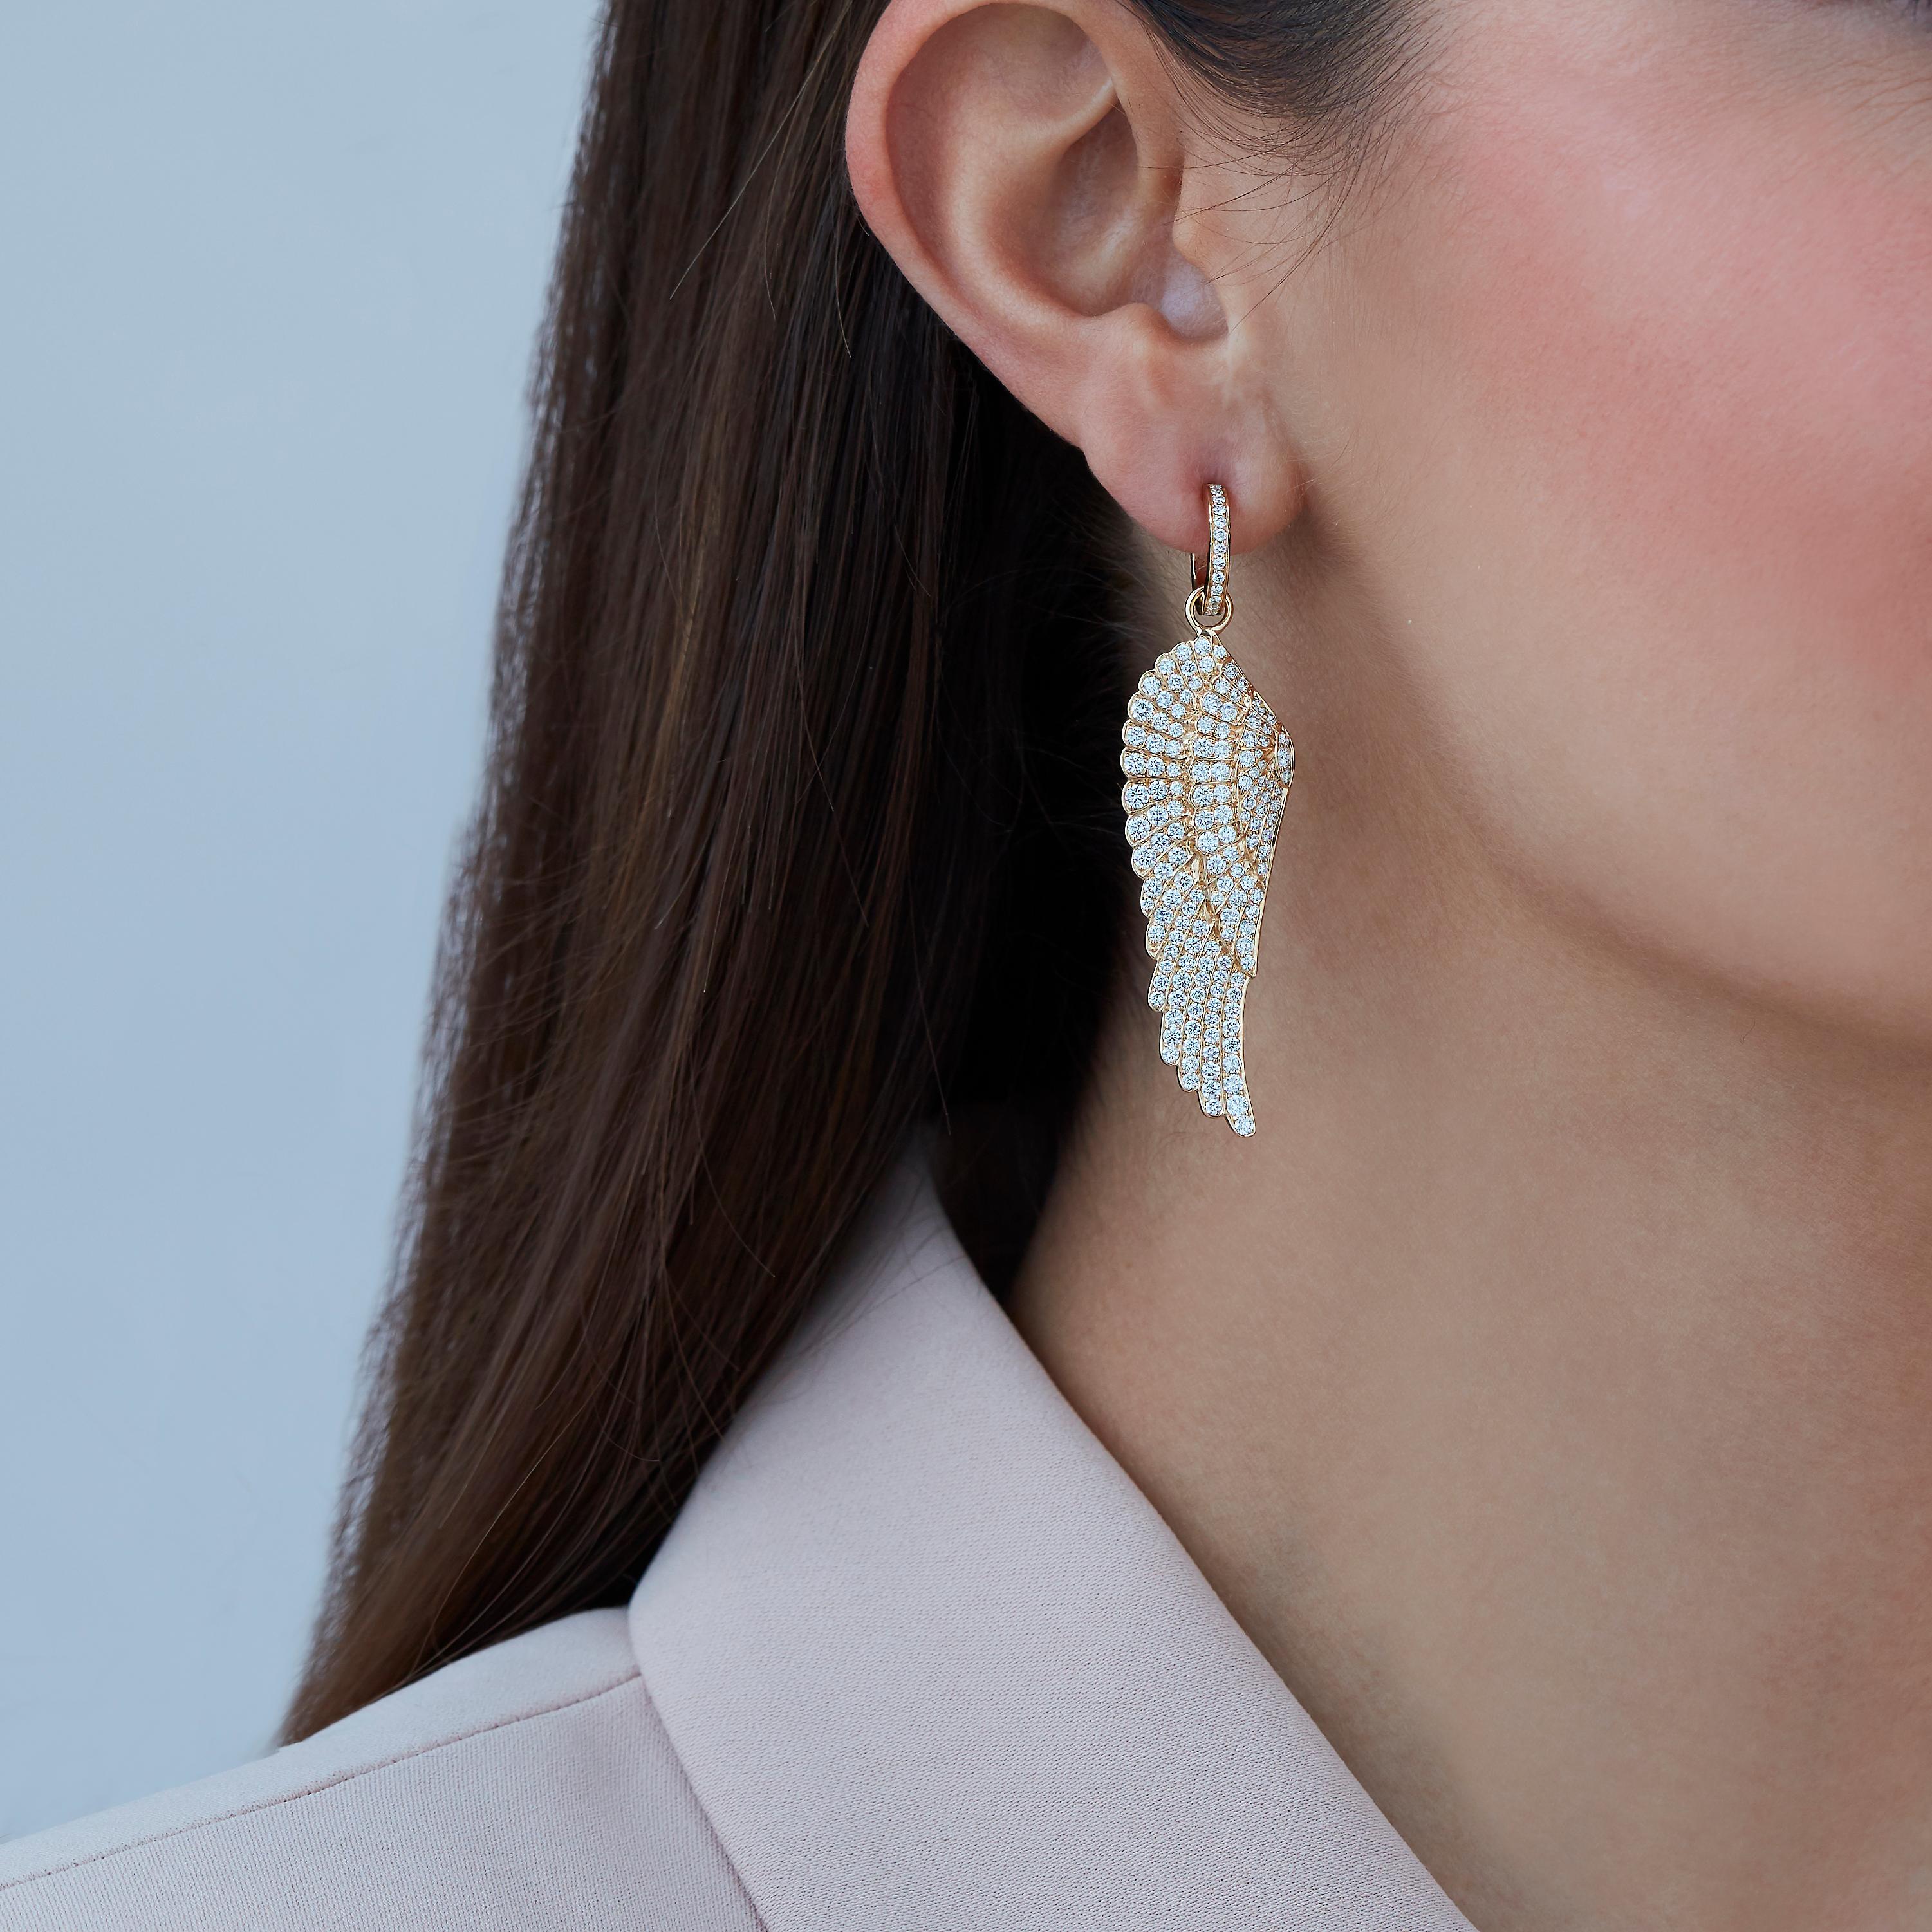 A House of Garrard pair of 18ct yellow gold large hoop and drop earrings from the 'Wings Classic' collection, set with round white diamonds. 

328 round white diamonds weighing: 4.19cts

The House of Garrard is the longest serving jeweller in the